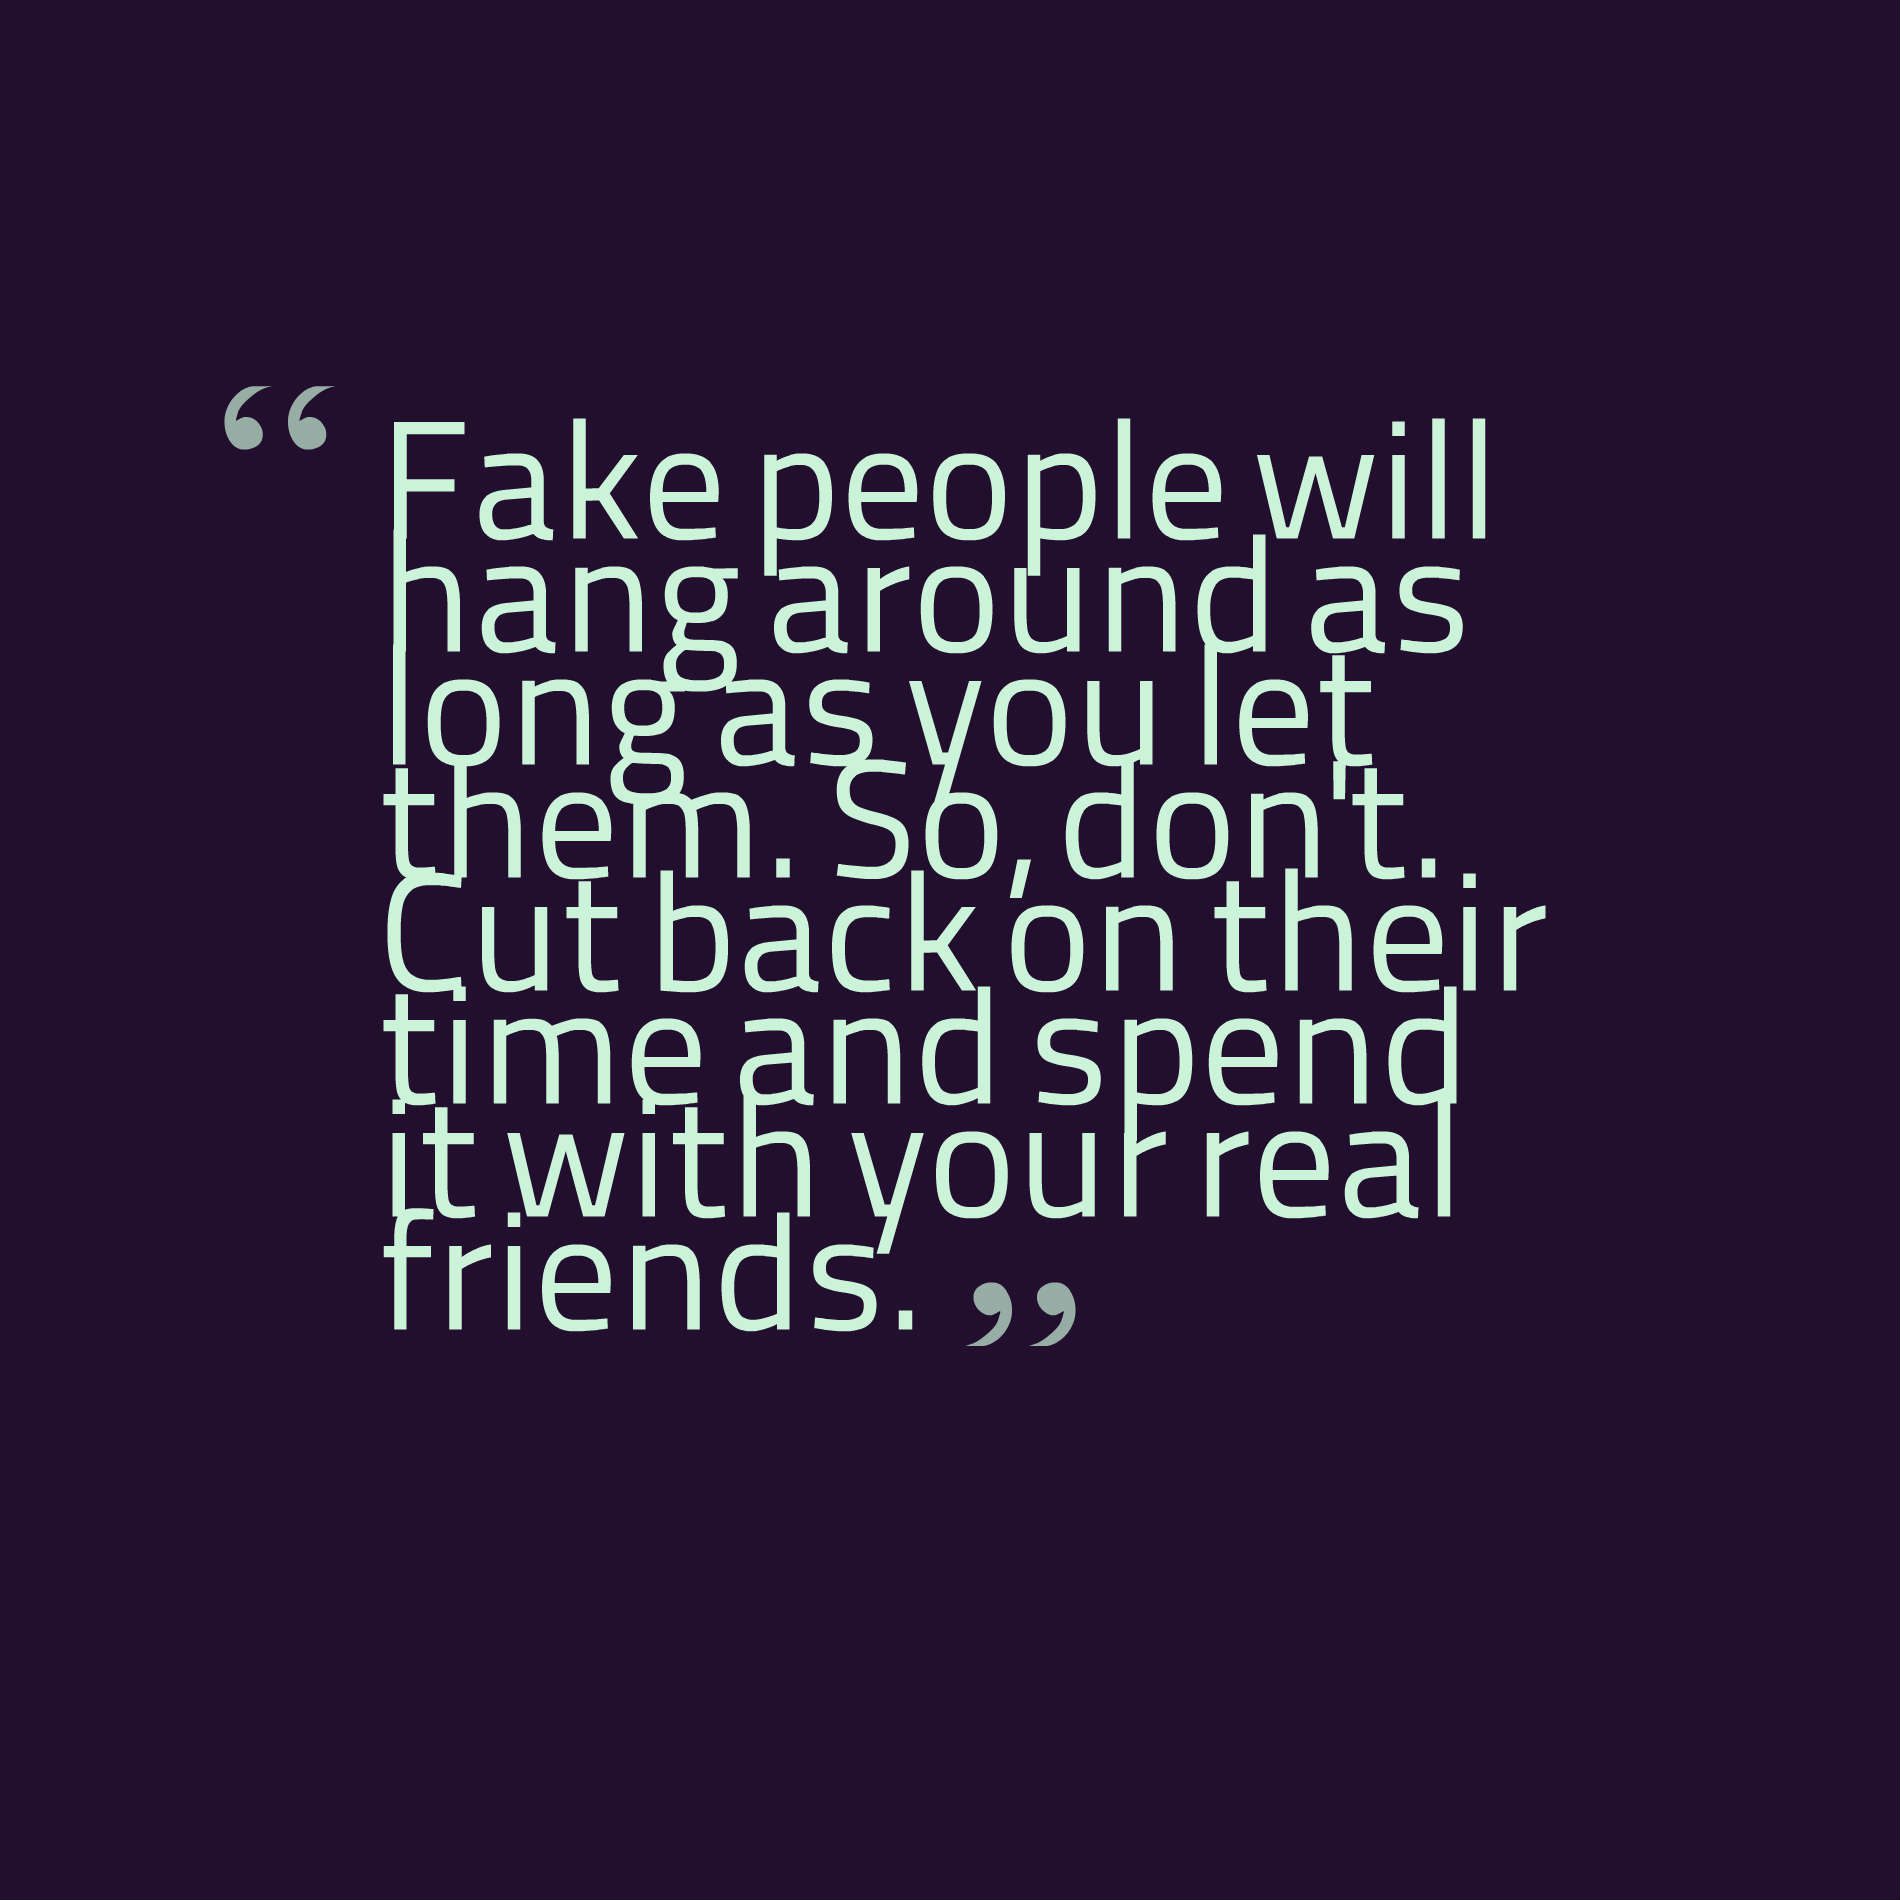 Fake people will hang around as long as you let them. So, don't. Cut back on their time and spend it with your real friends